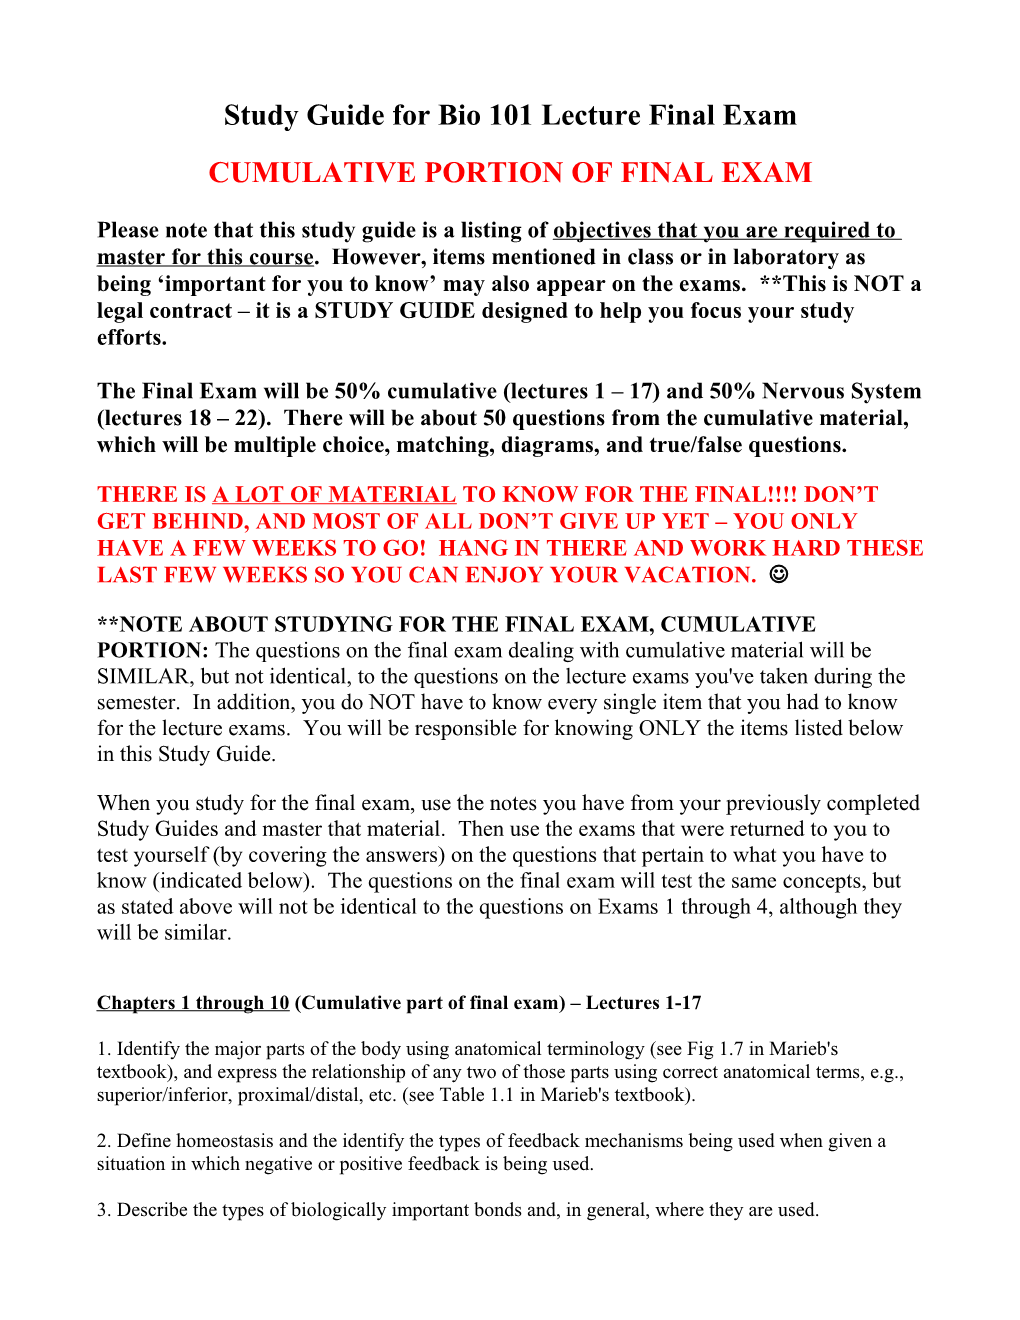 Study Guide for Bio 101 Lecture Final Exam